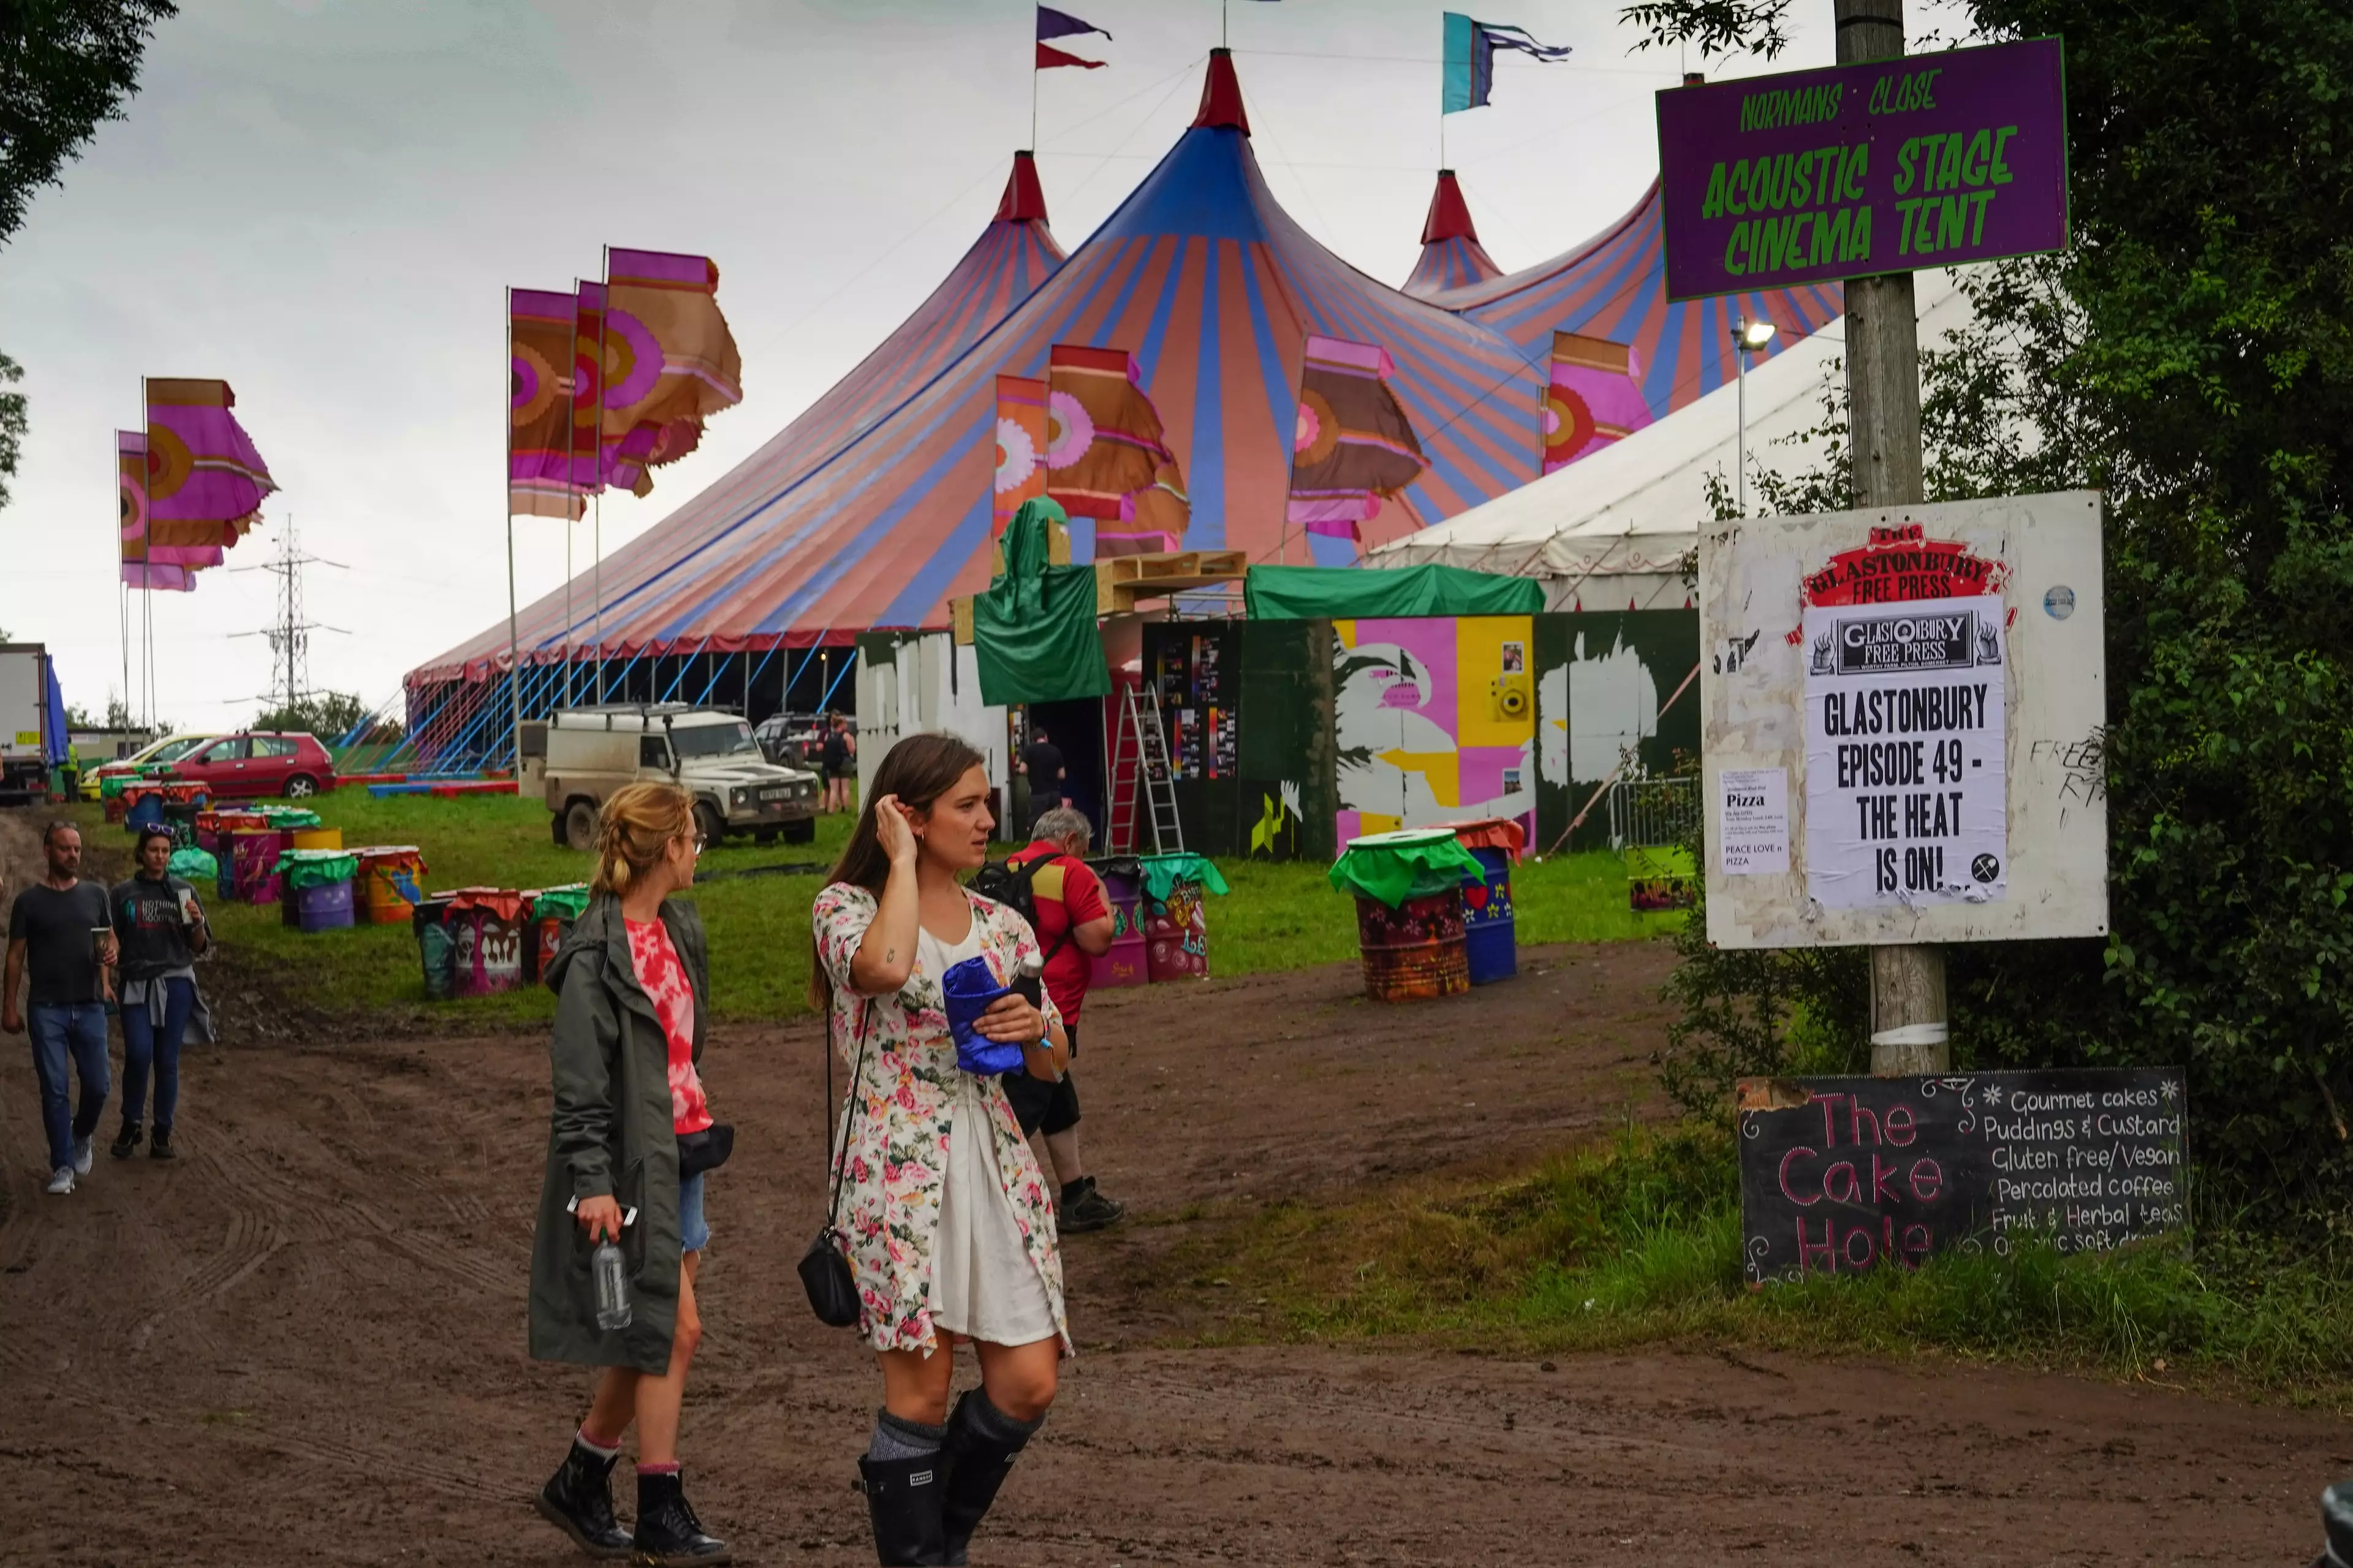 Emily Eavis described the one-day event as a larger scale version of the festival's Pilton Party (